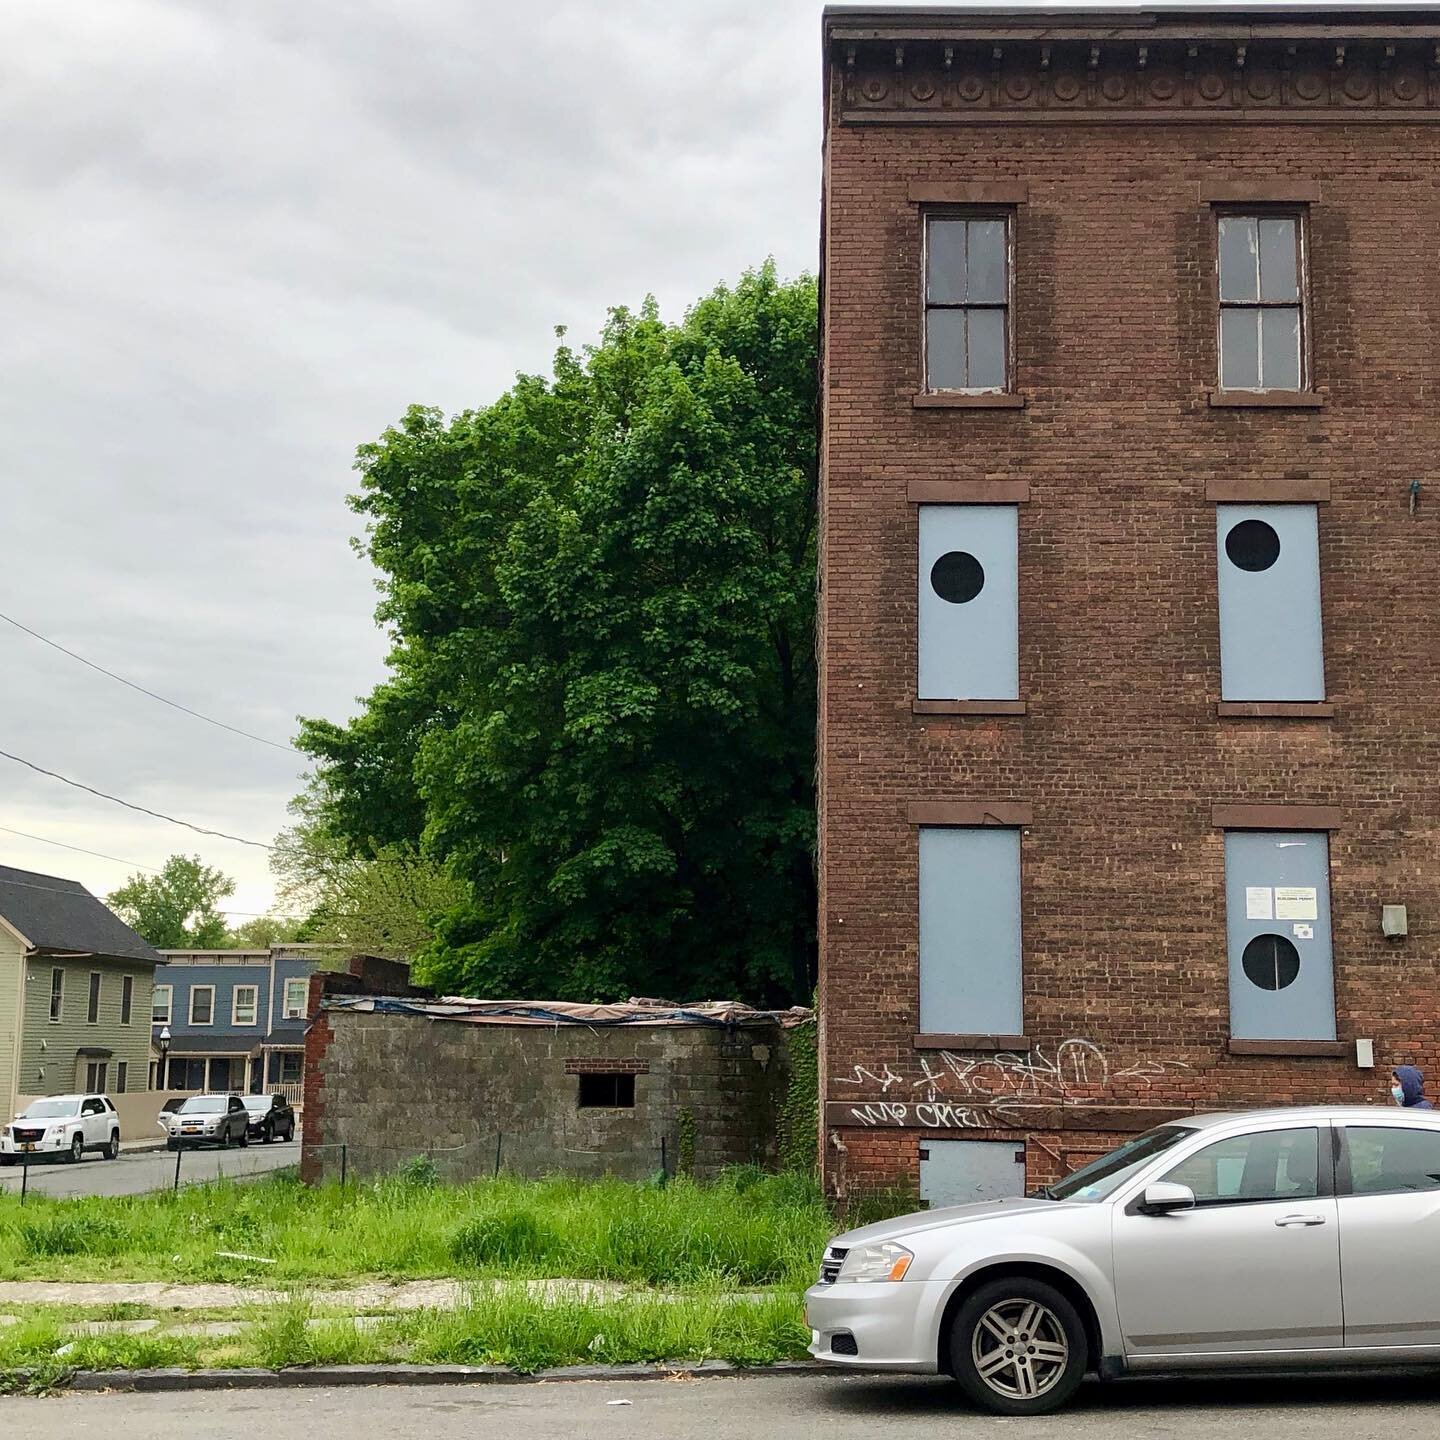 The Newburgh Community Land Bank is pleased to release a Request for Proposals for the purchase and development of 143 WASHINGTON ST -- DUE AUGUST 31, 2020

Please visit our website for details and to download the application. 
https://www.newburghco